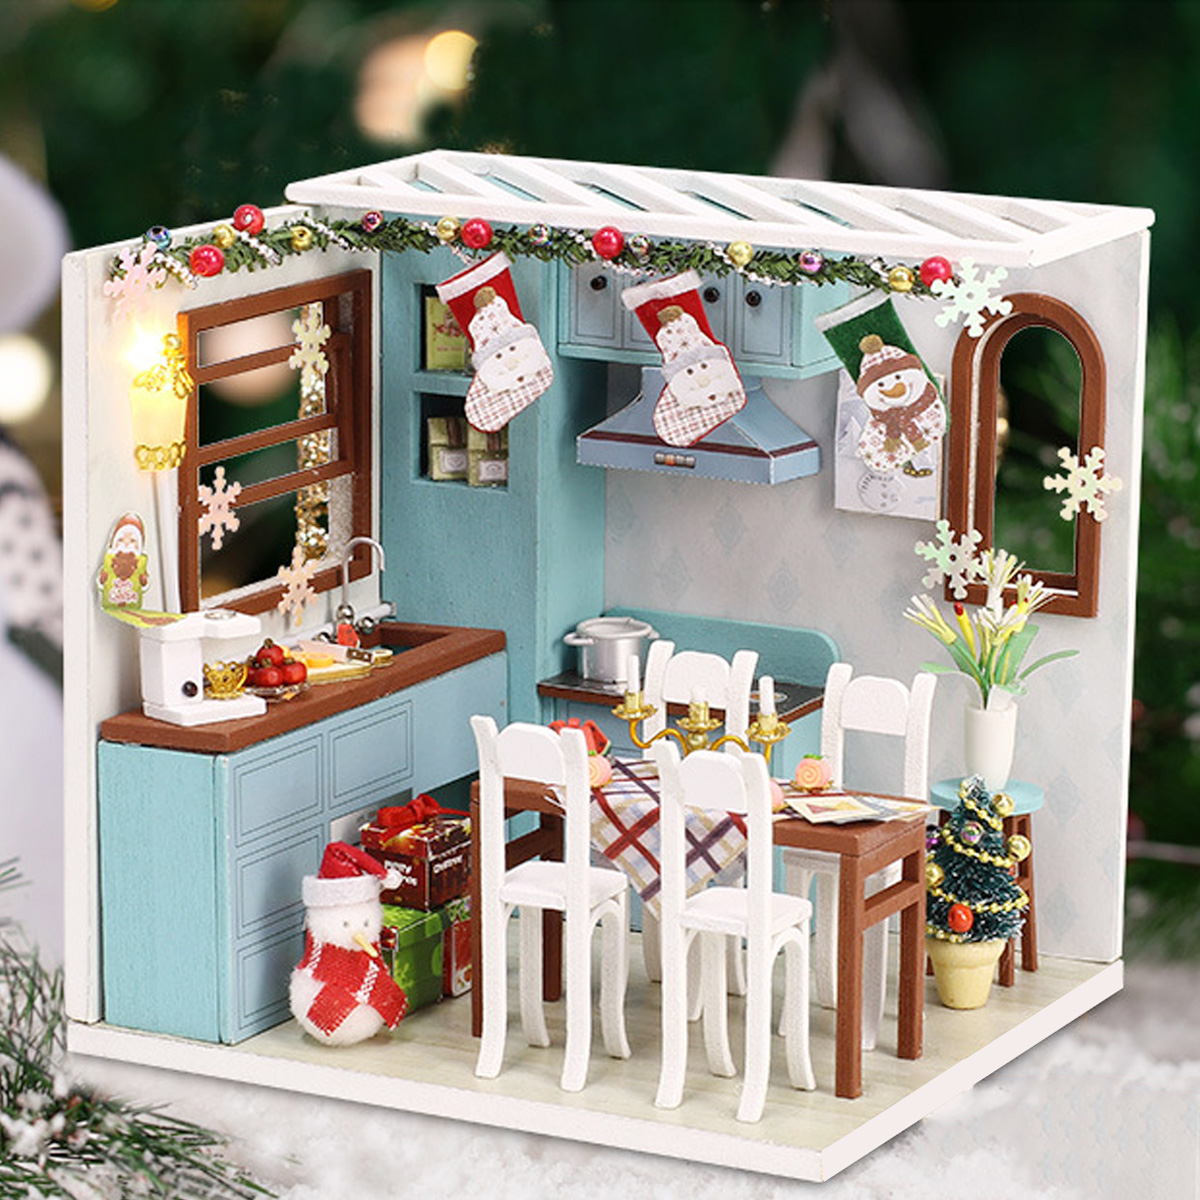 Wooden-Dining-Room-DIY-Handmade-Assemble-Doll-House-Miniature-Furniture-Kit-Education-Toy-with-LED-L-1737848-3